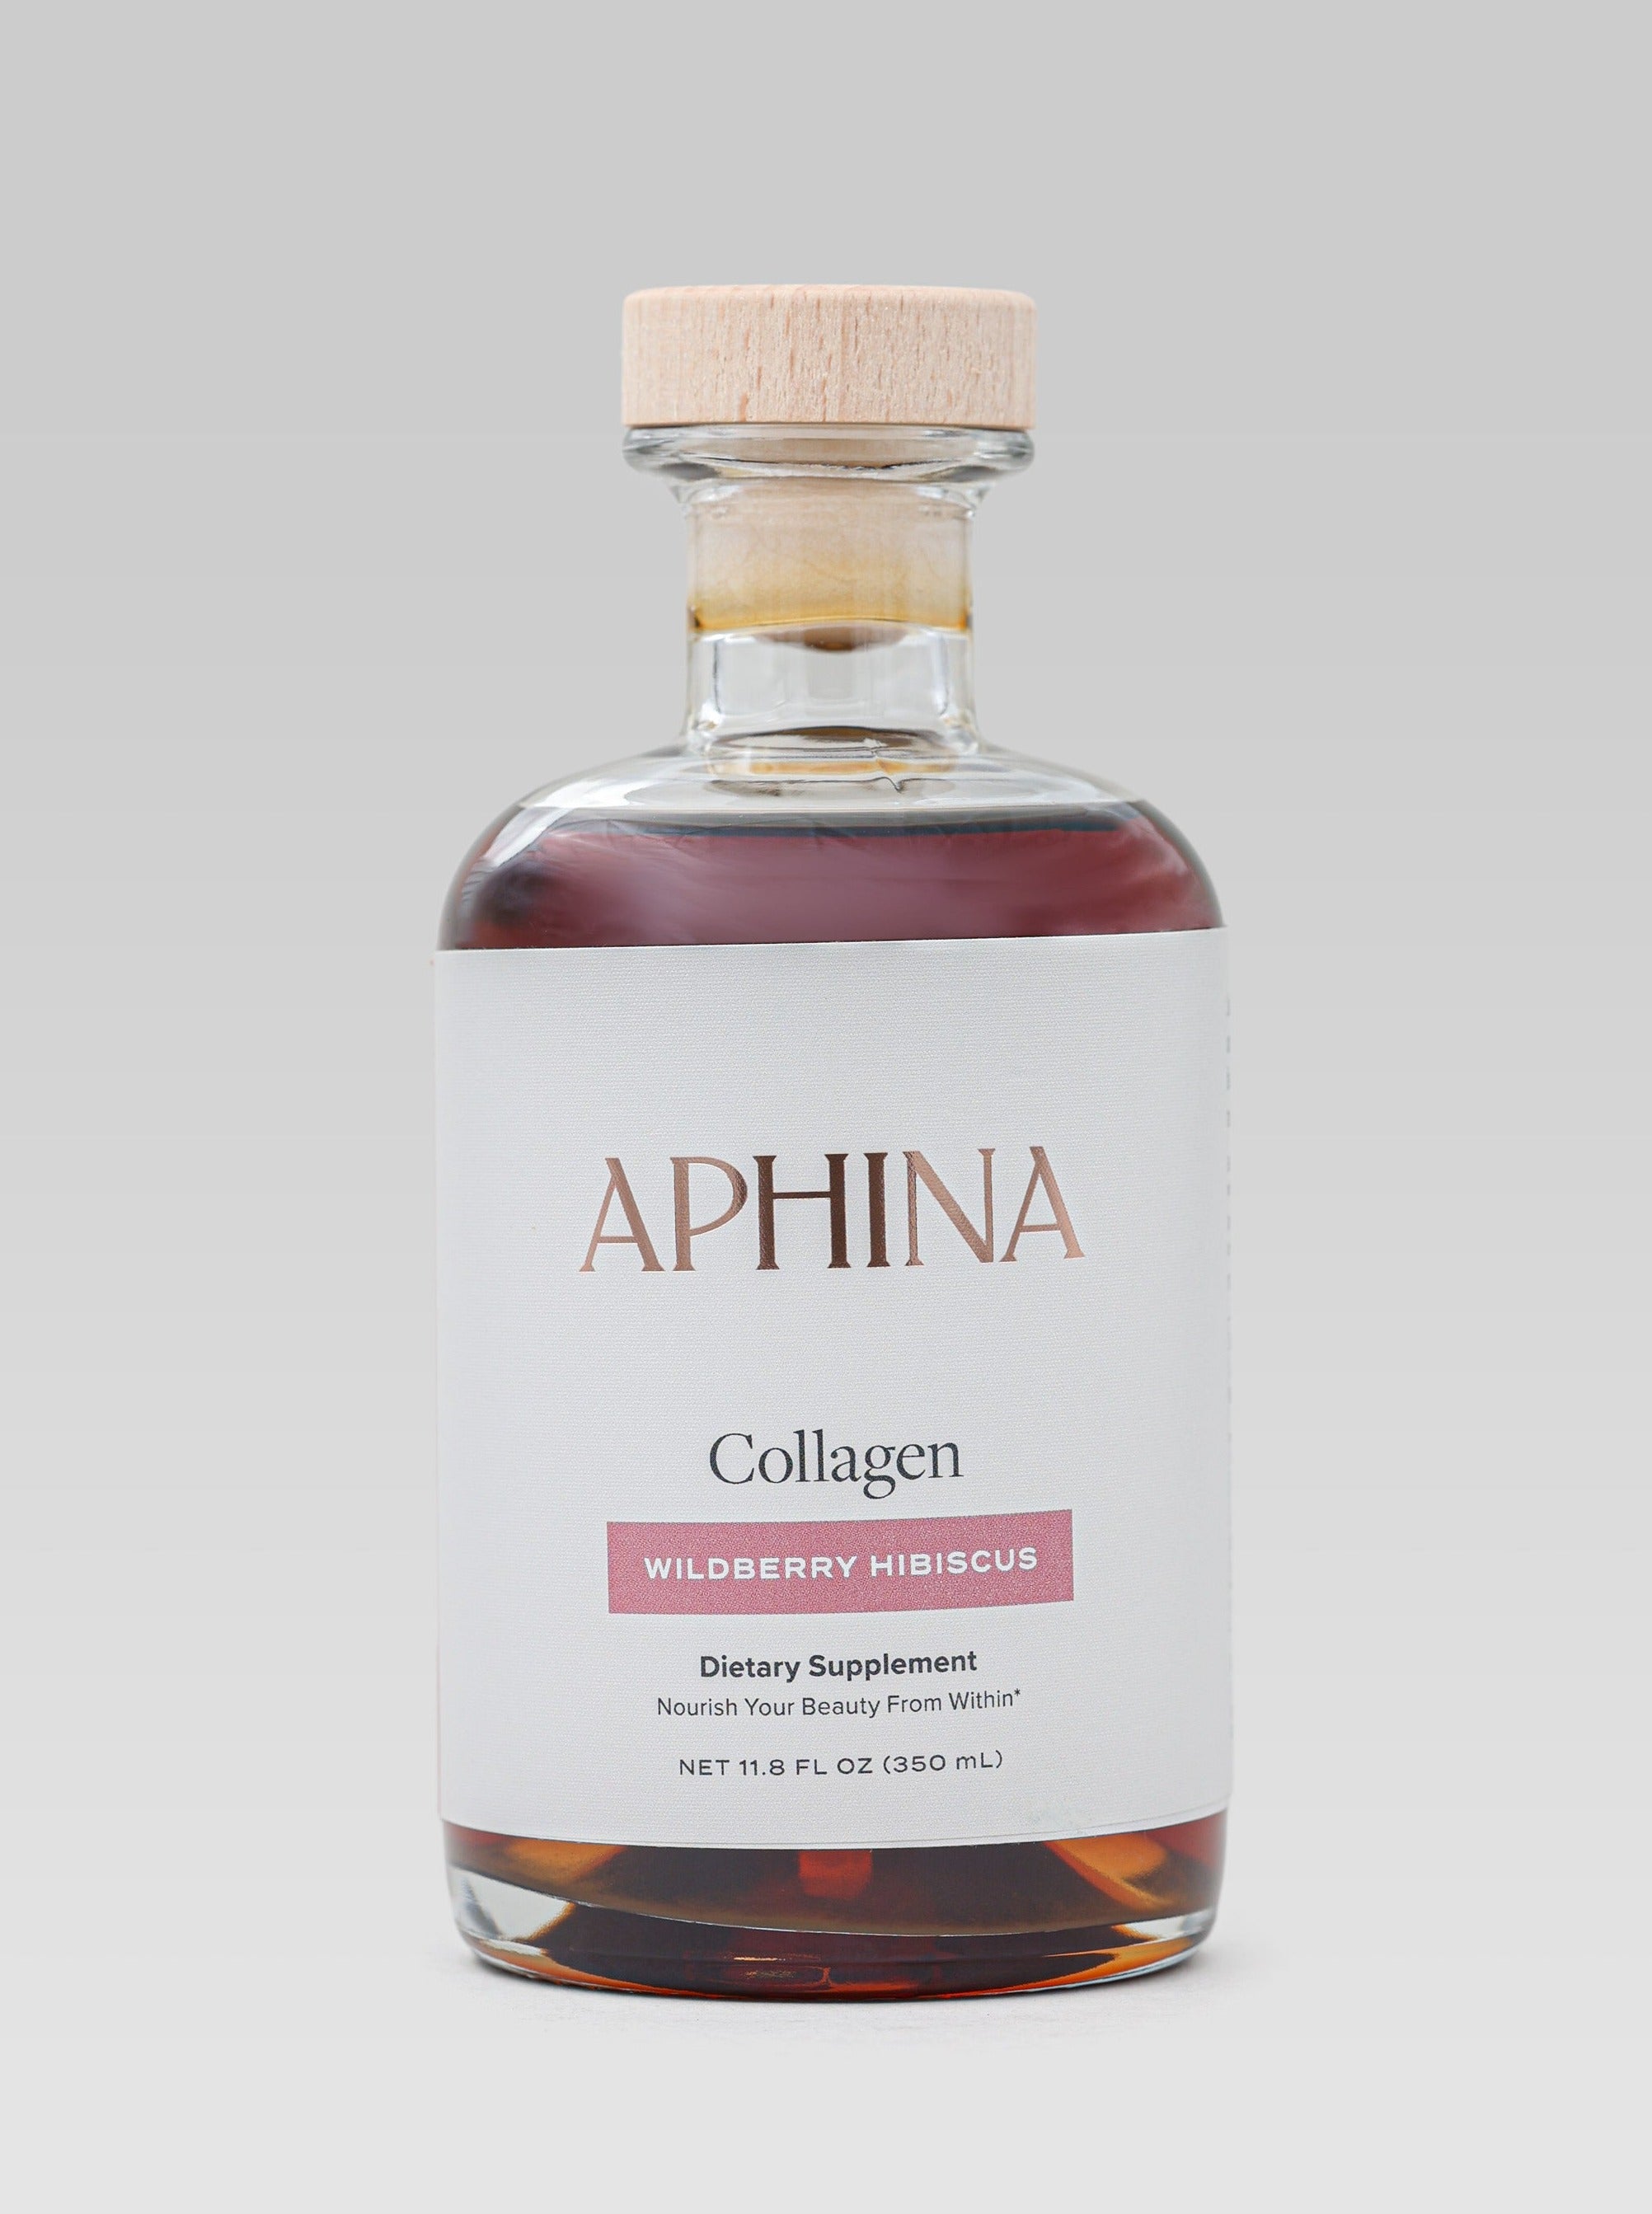 Aphina Wildberry Hibiscus Collagen product shot